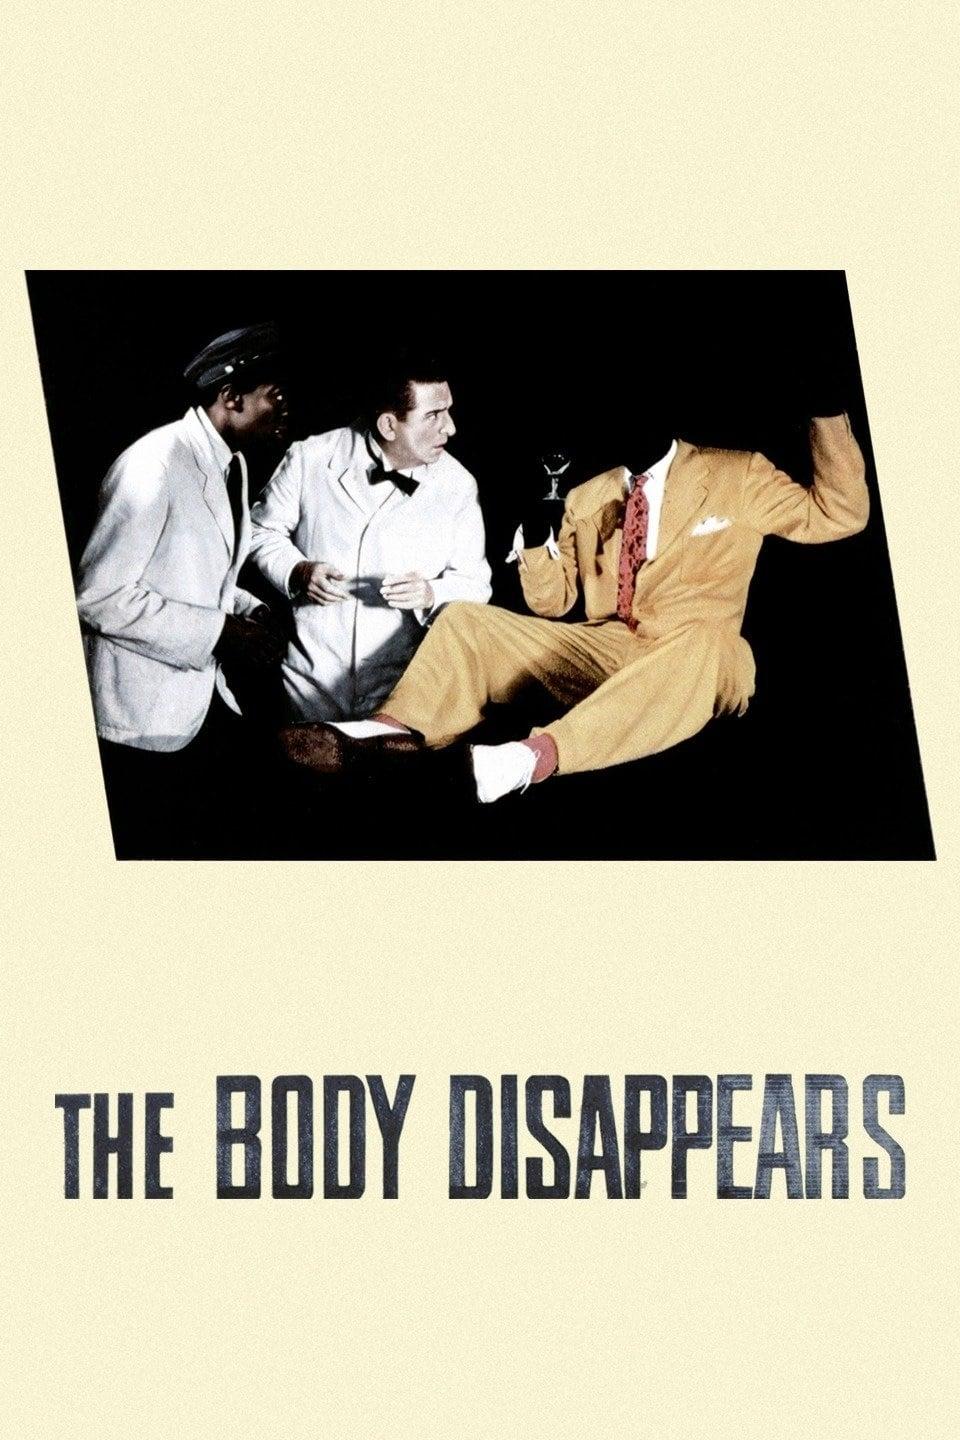 The Body Disappears poster